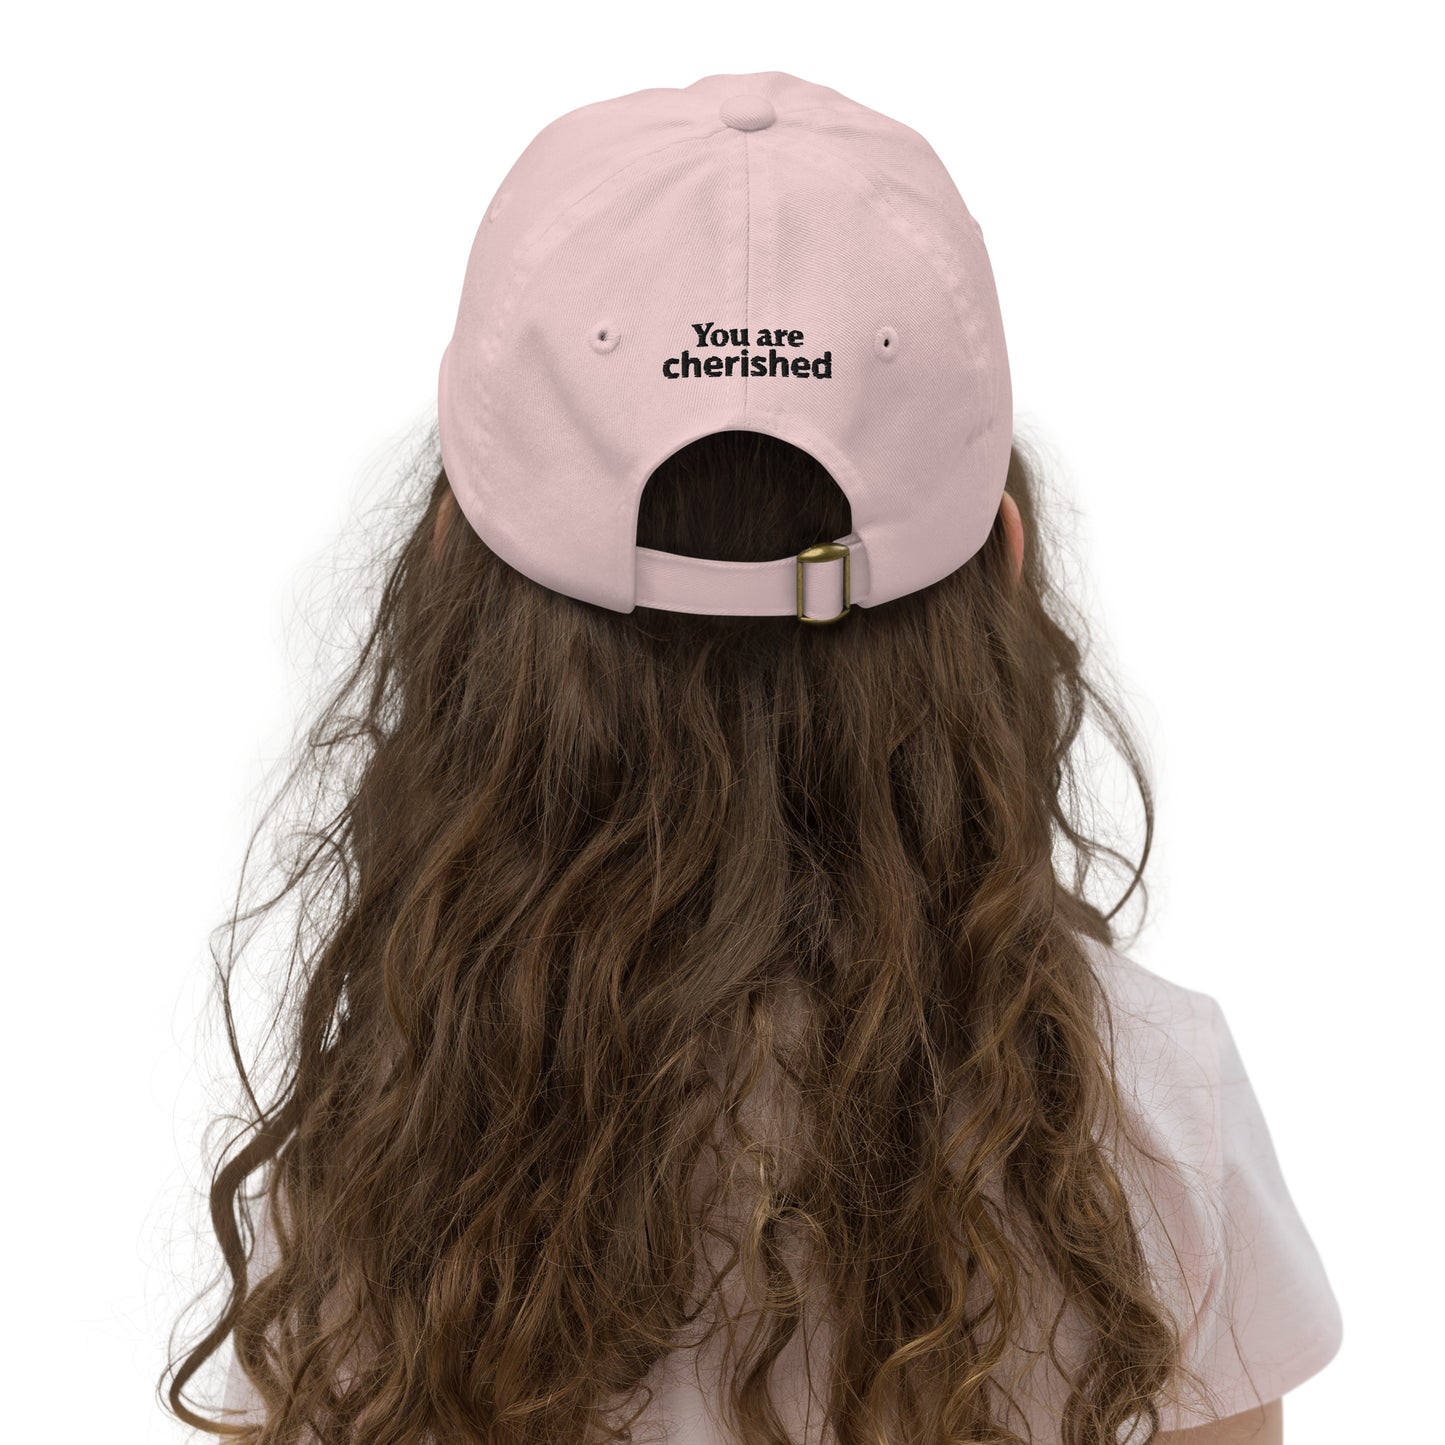 God Said "You are Cherished" youth hat